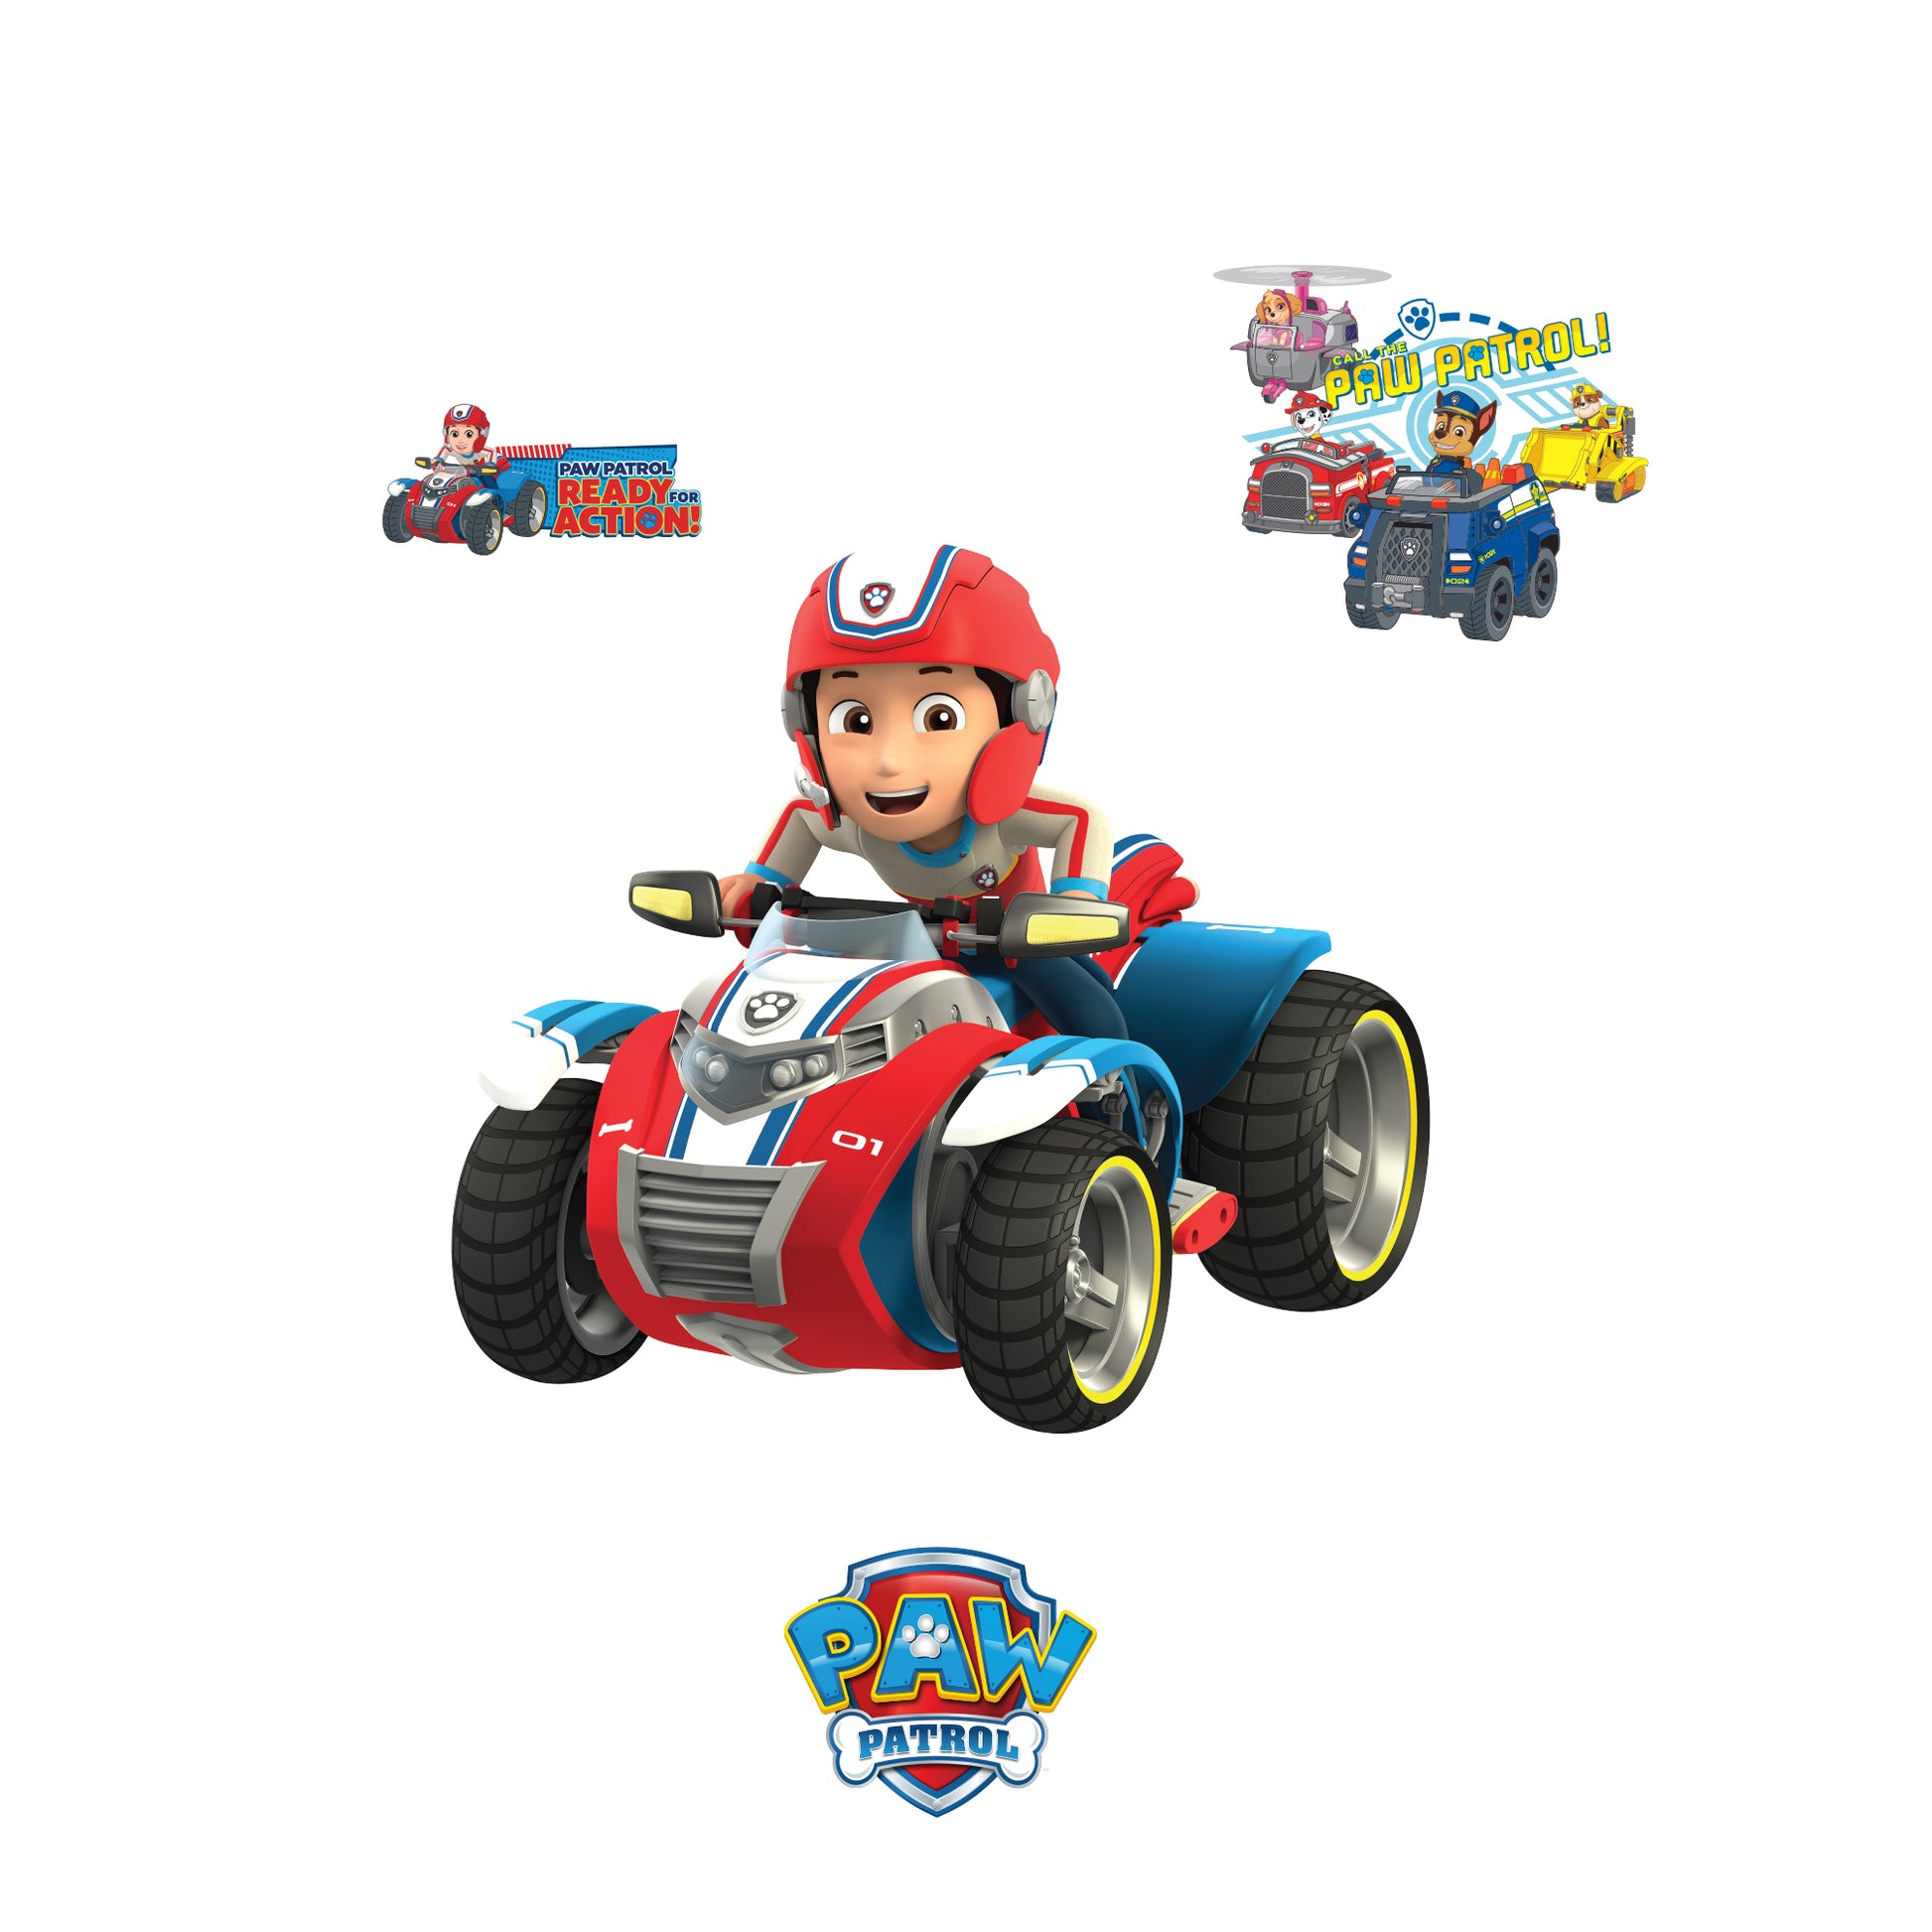 Paw Patrol: Ryder Vehicle RealBig - Officially Licensed Nickelodeon  Removable Adhesive Decal